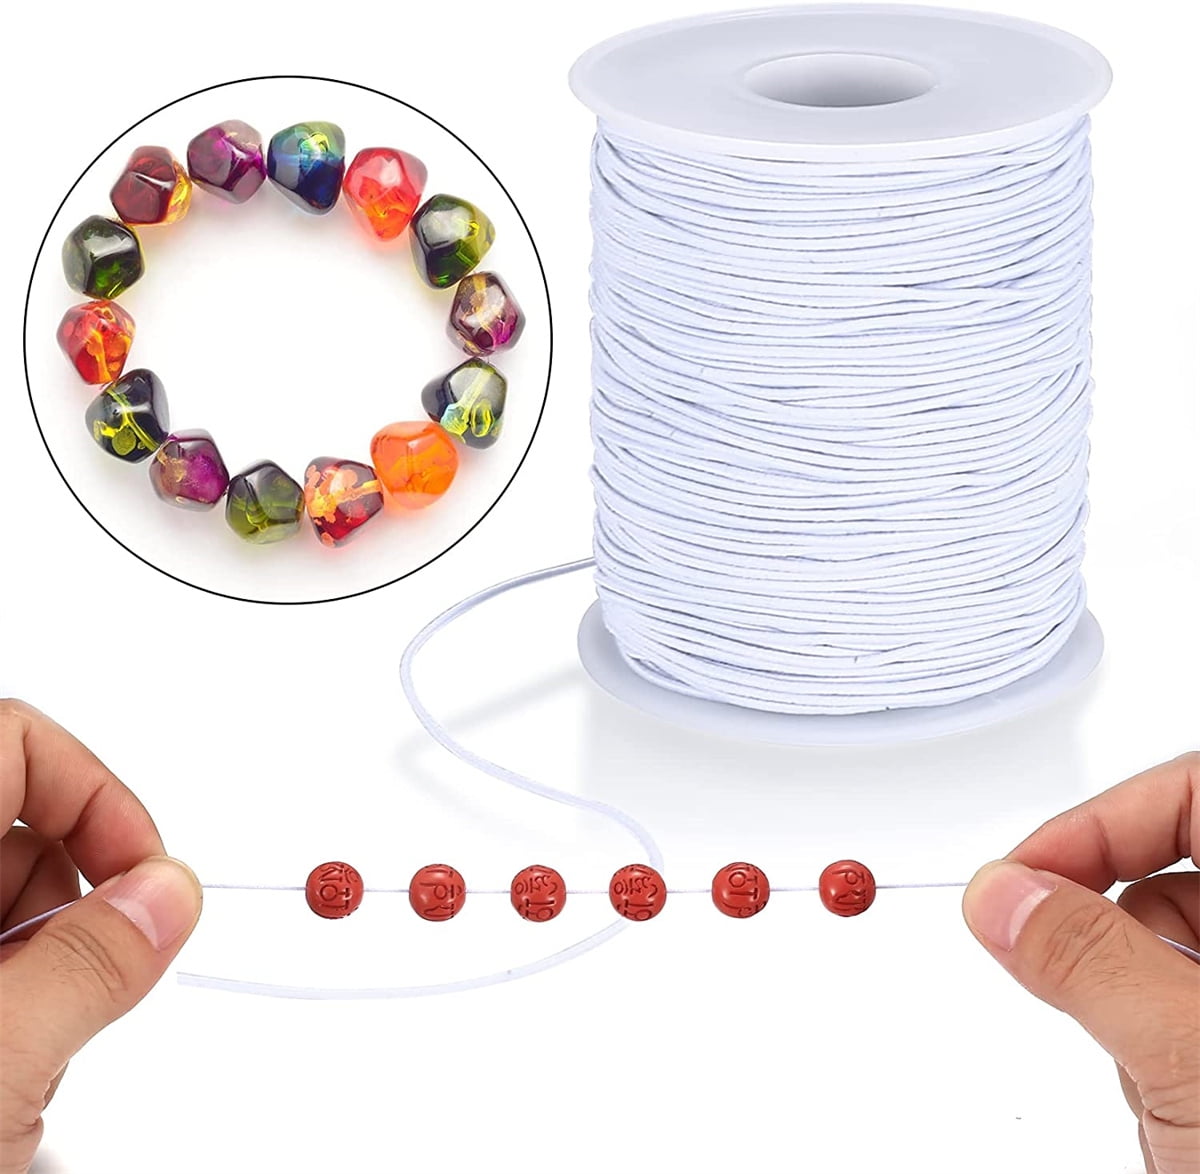 Incraftables Elastic String Cord Set of 3 Rolls (White, Black & Rainbow) 1mm Thick Stretchy Cording Set for DIY Jewelry Bead Mak